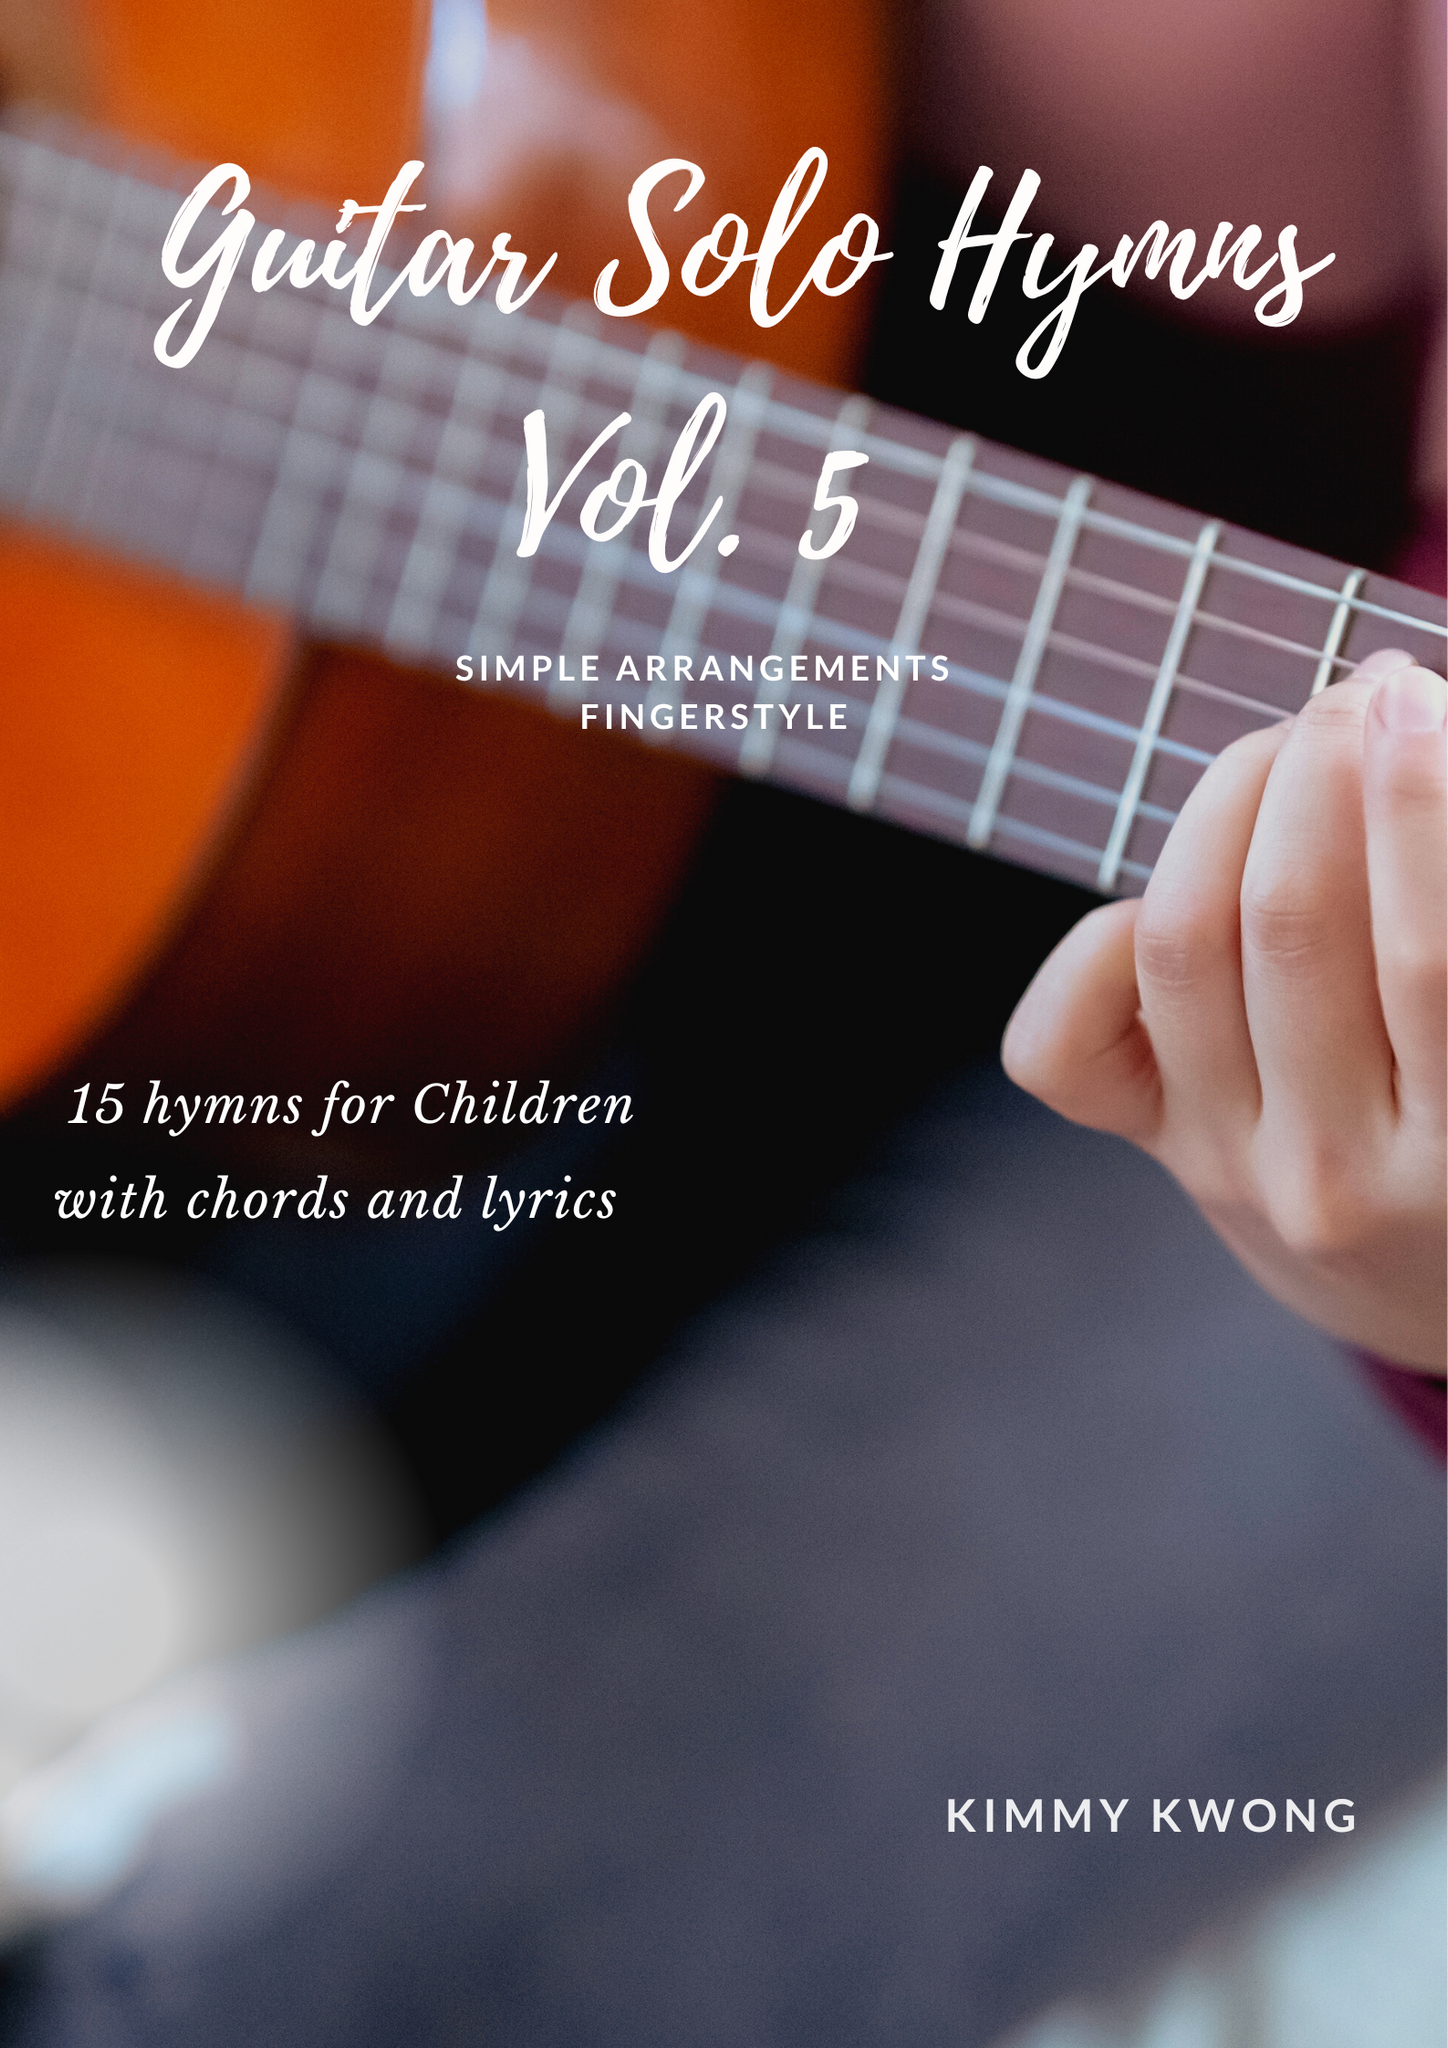 Guitar Solo Hymns Ebook Vol.5 for Children is out now!